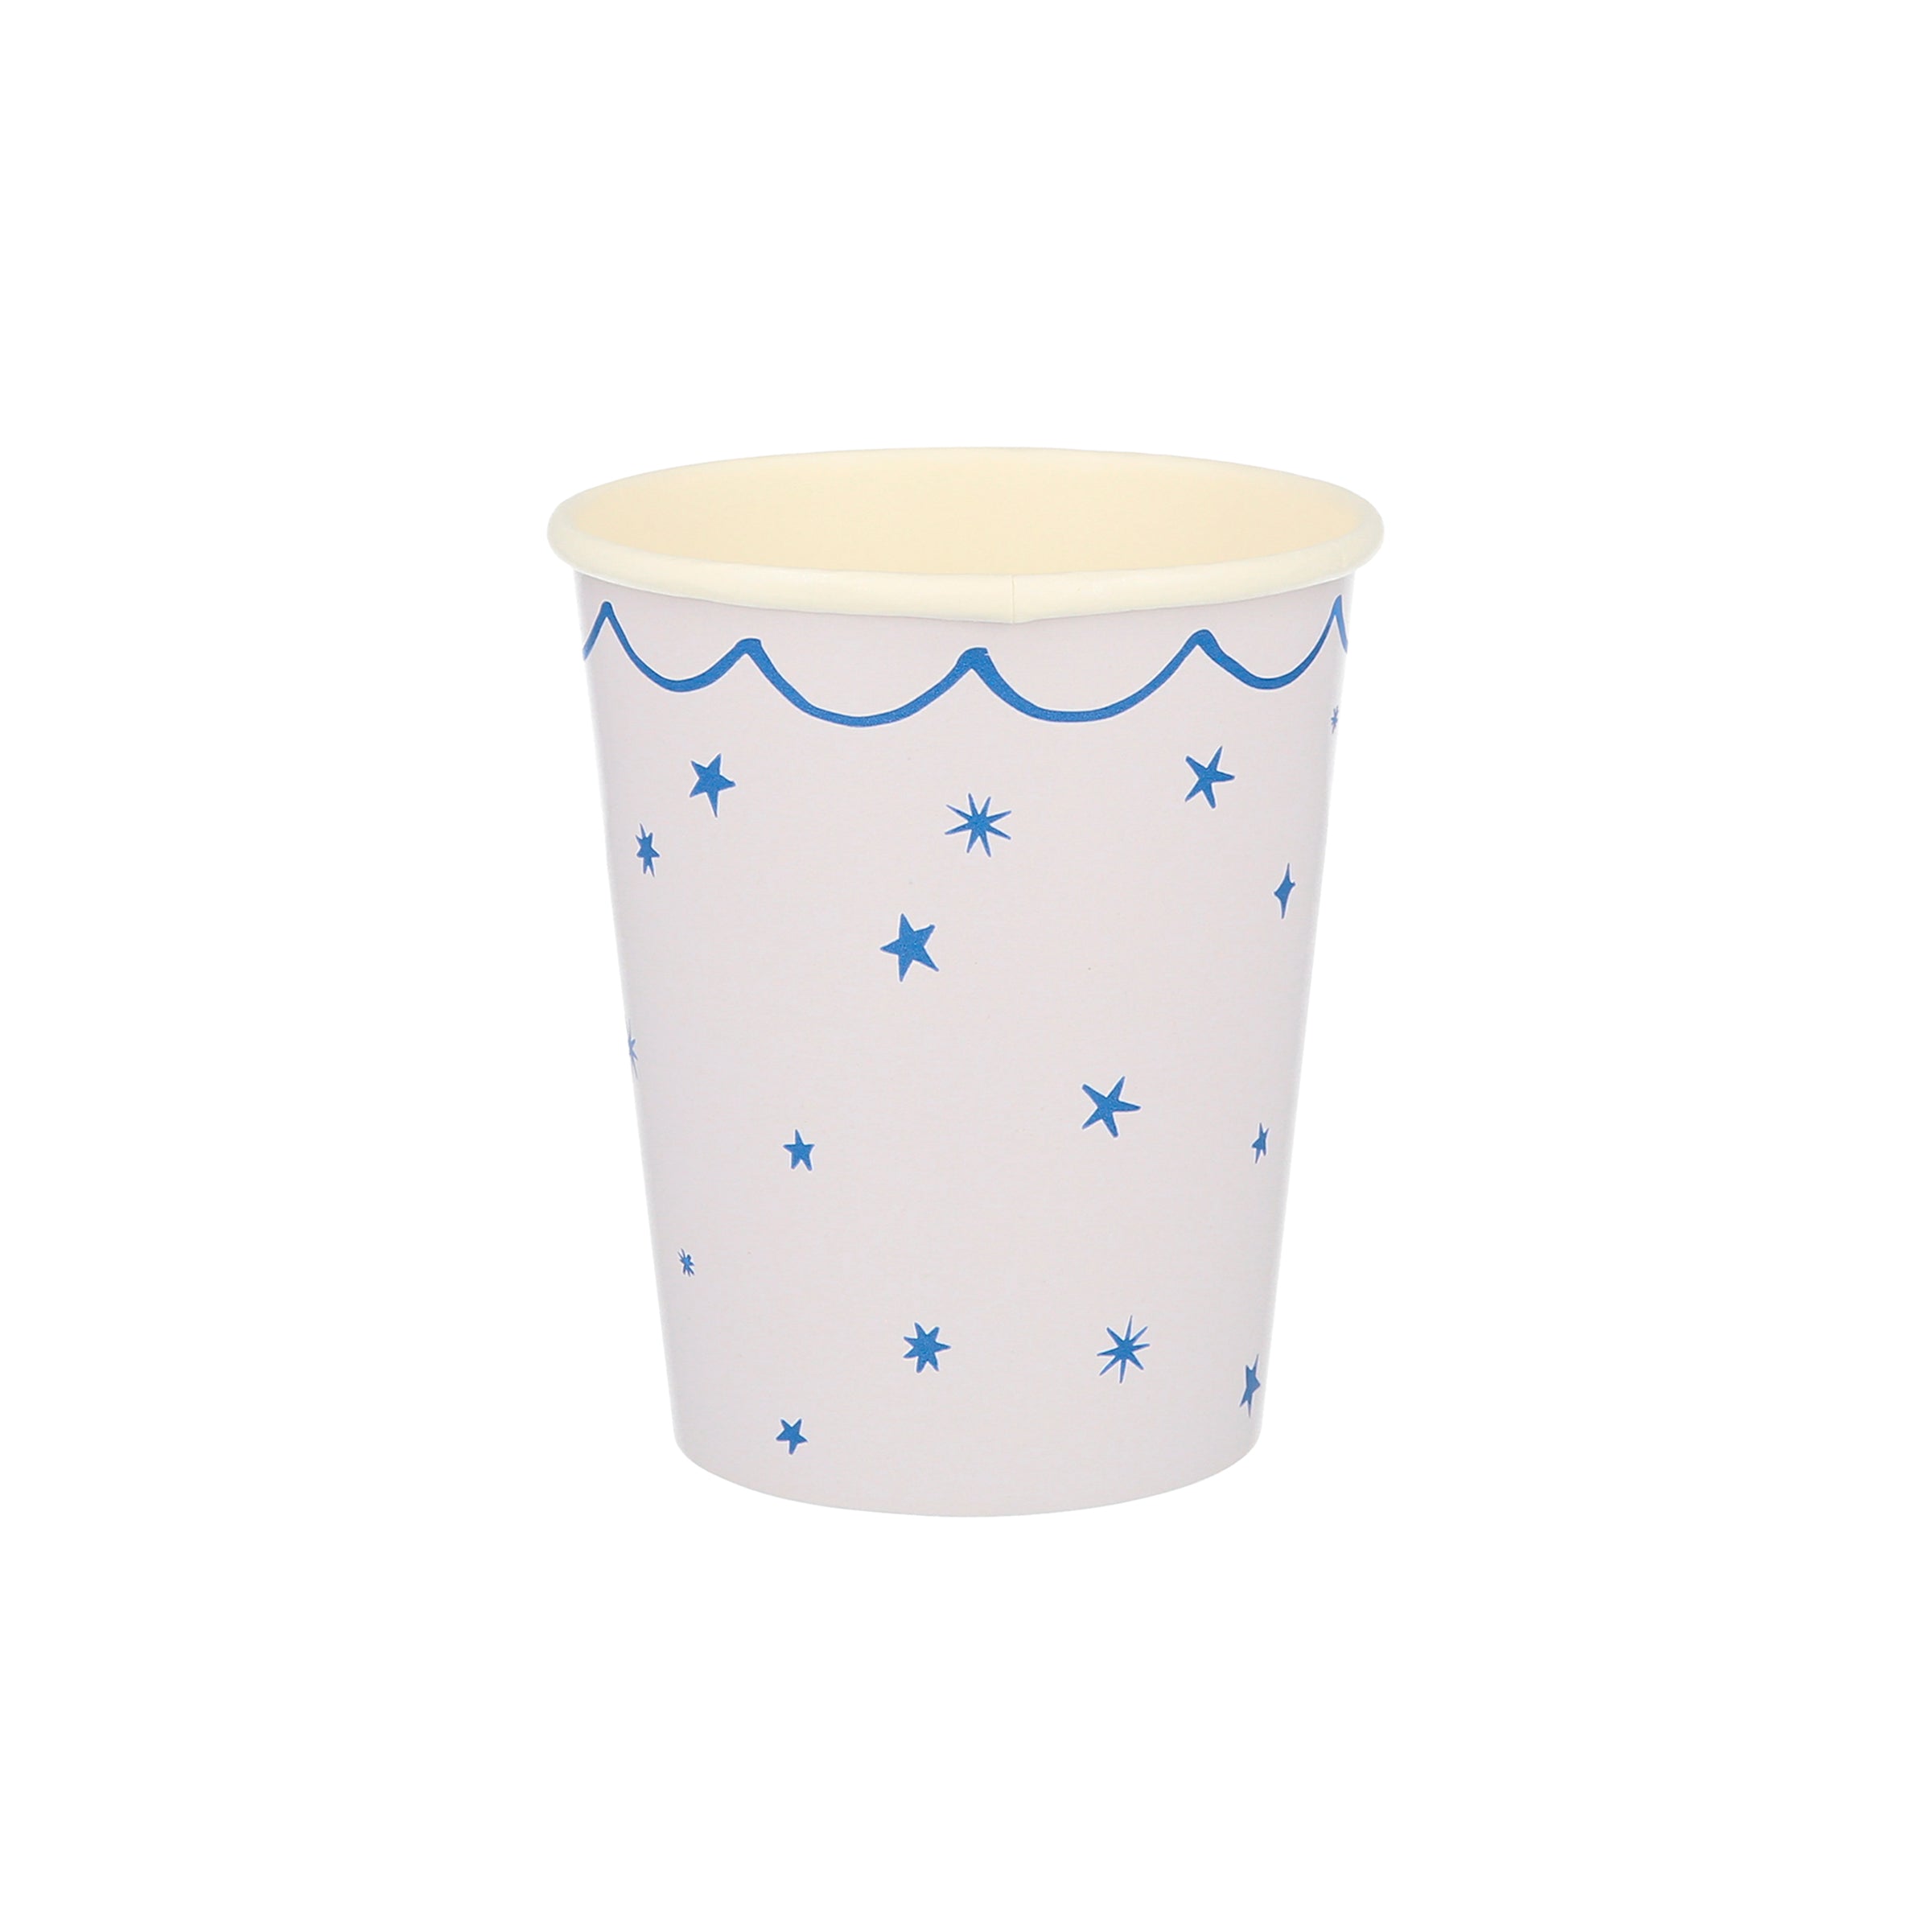 Our star party cup set features blue cups, pink cups and mint cups for the perfect paper cup selection.